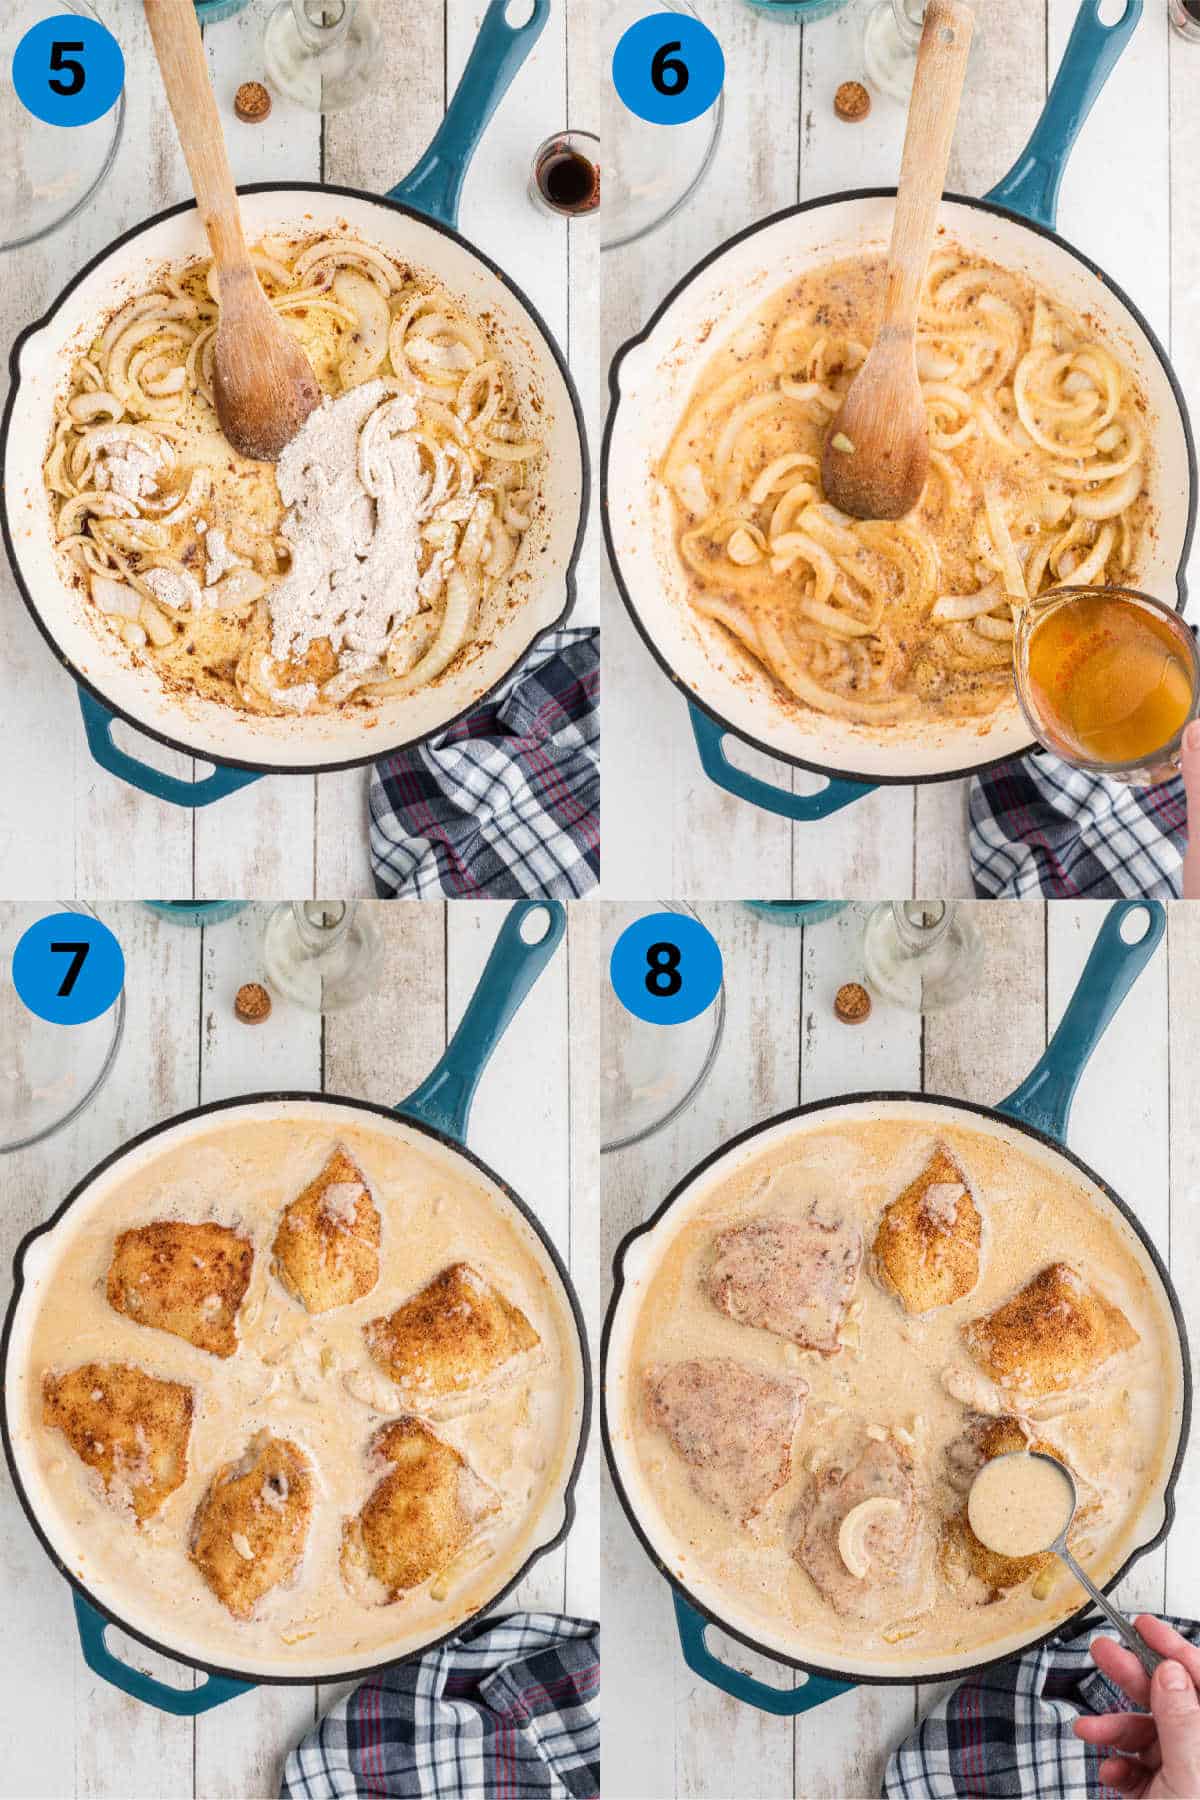 A collage of four images showing how to make smothered chicken, recipe steps 5-8.